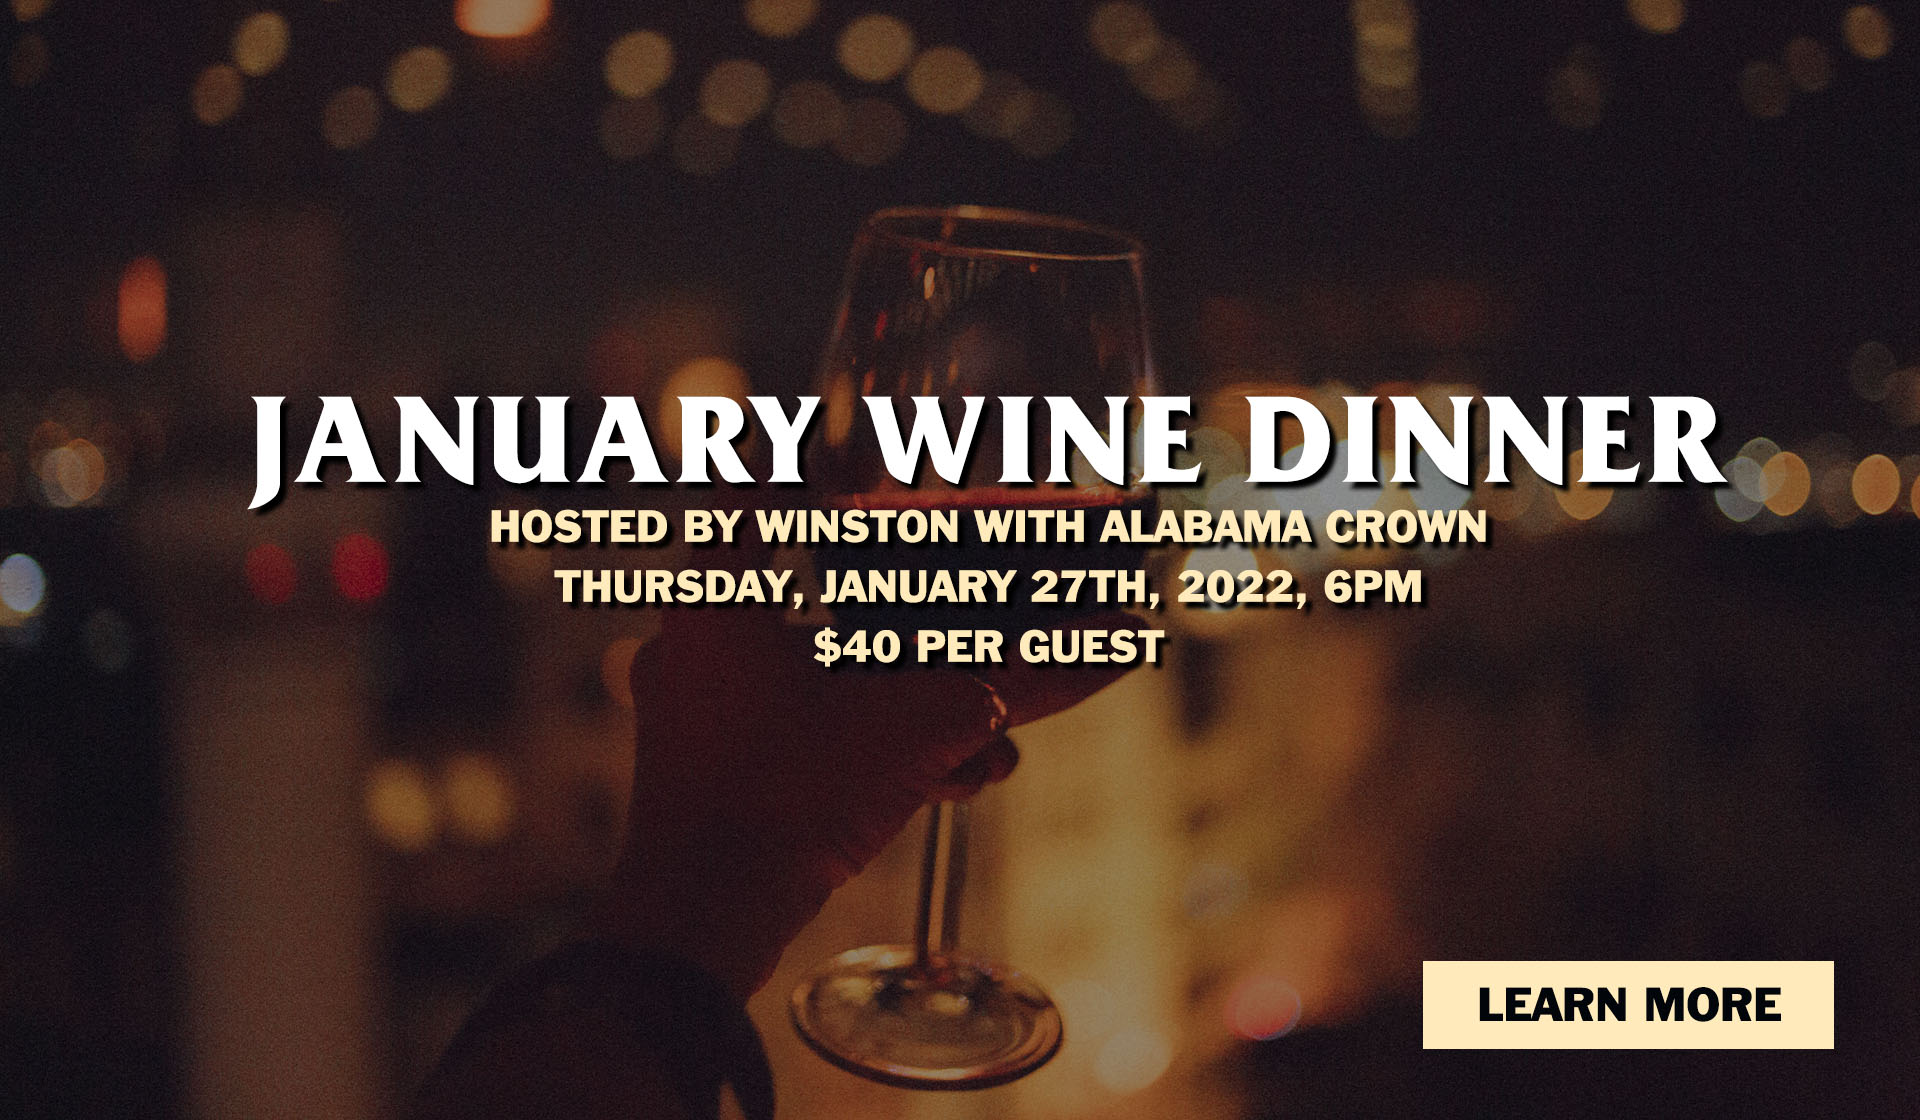 View the menu for Ginny Lane's January Wine Dinner